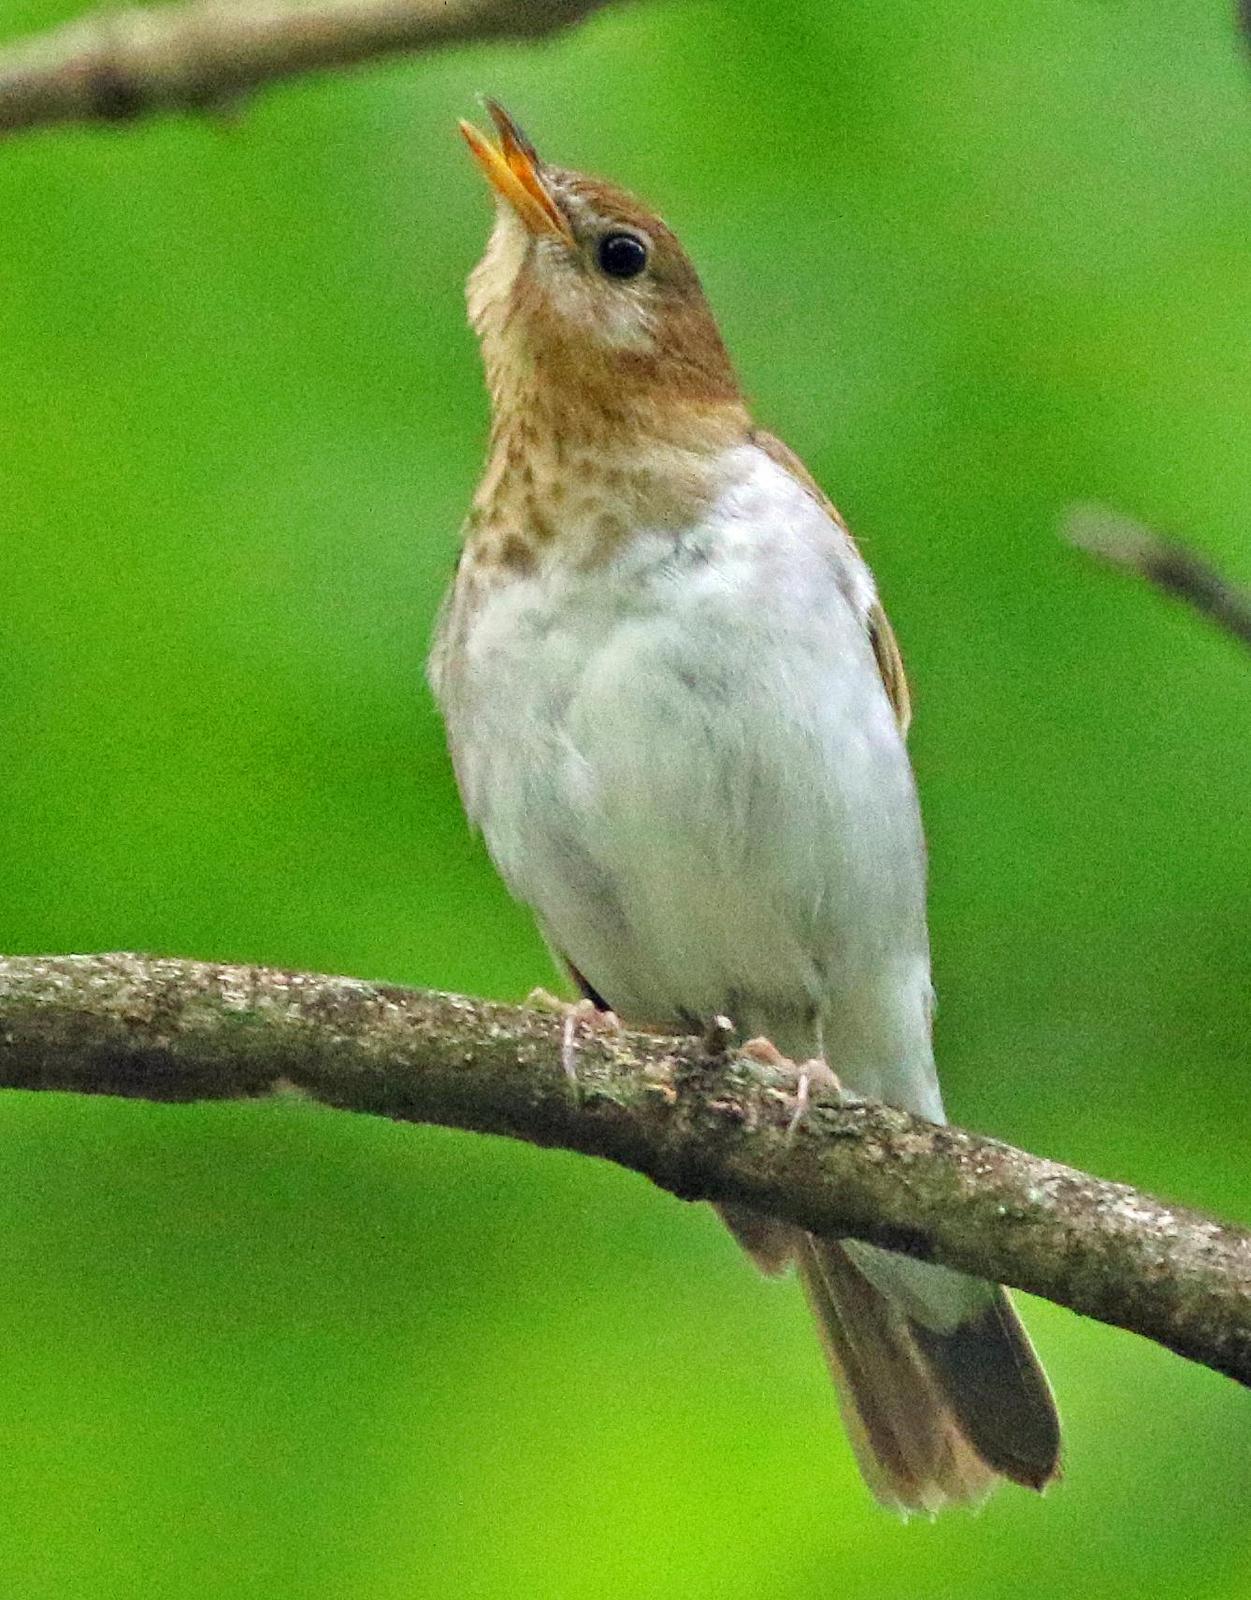 Veery Photo by Tom Gannon